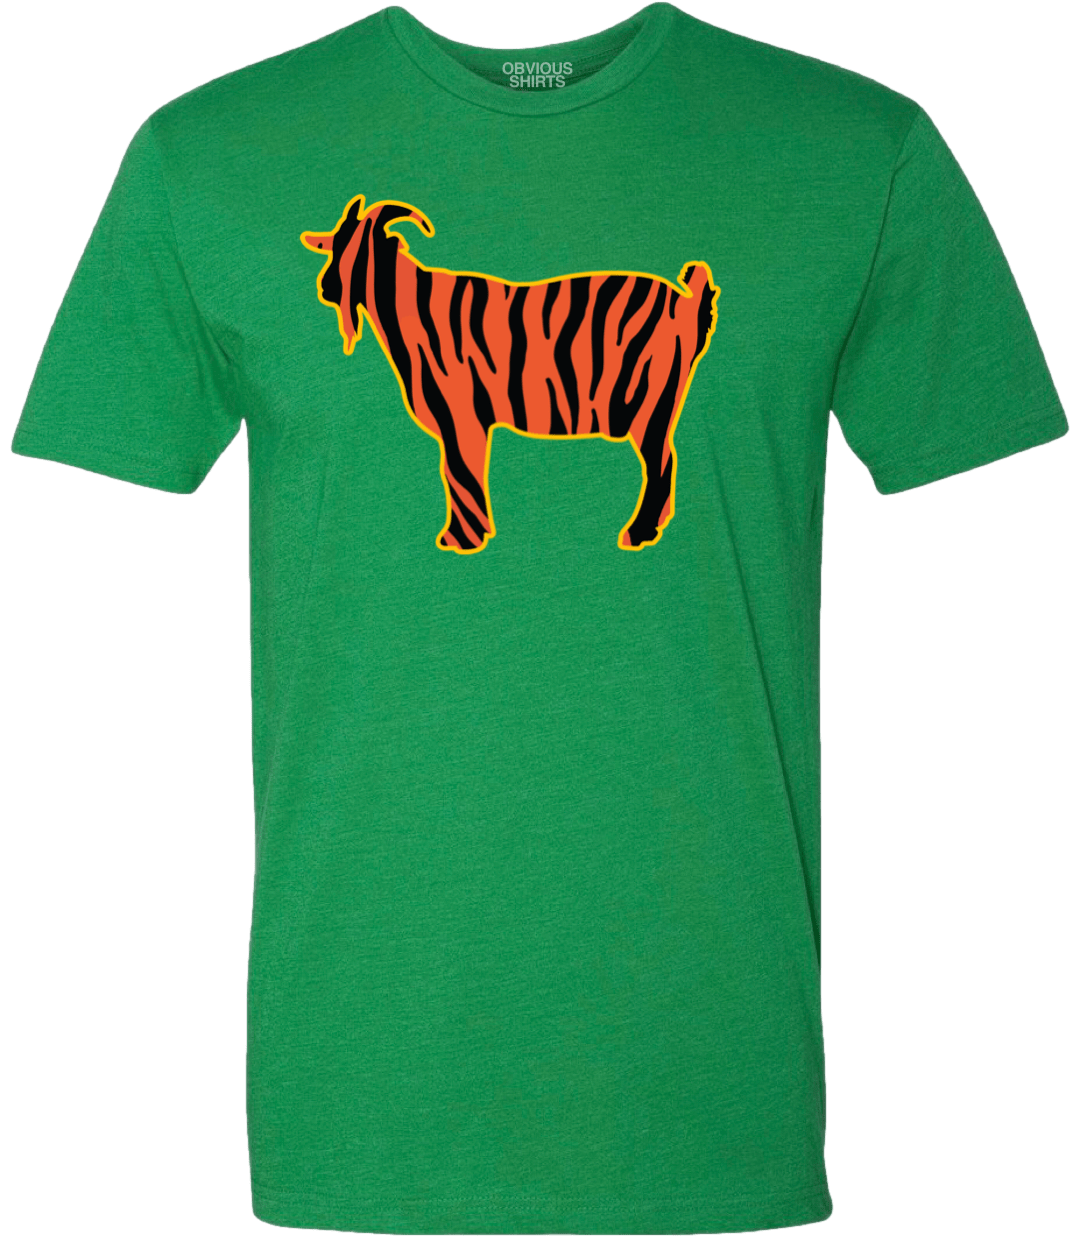 THE TIGER GOAT. (GREEN) - OBVIOUS SHIRTS